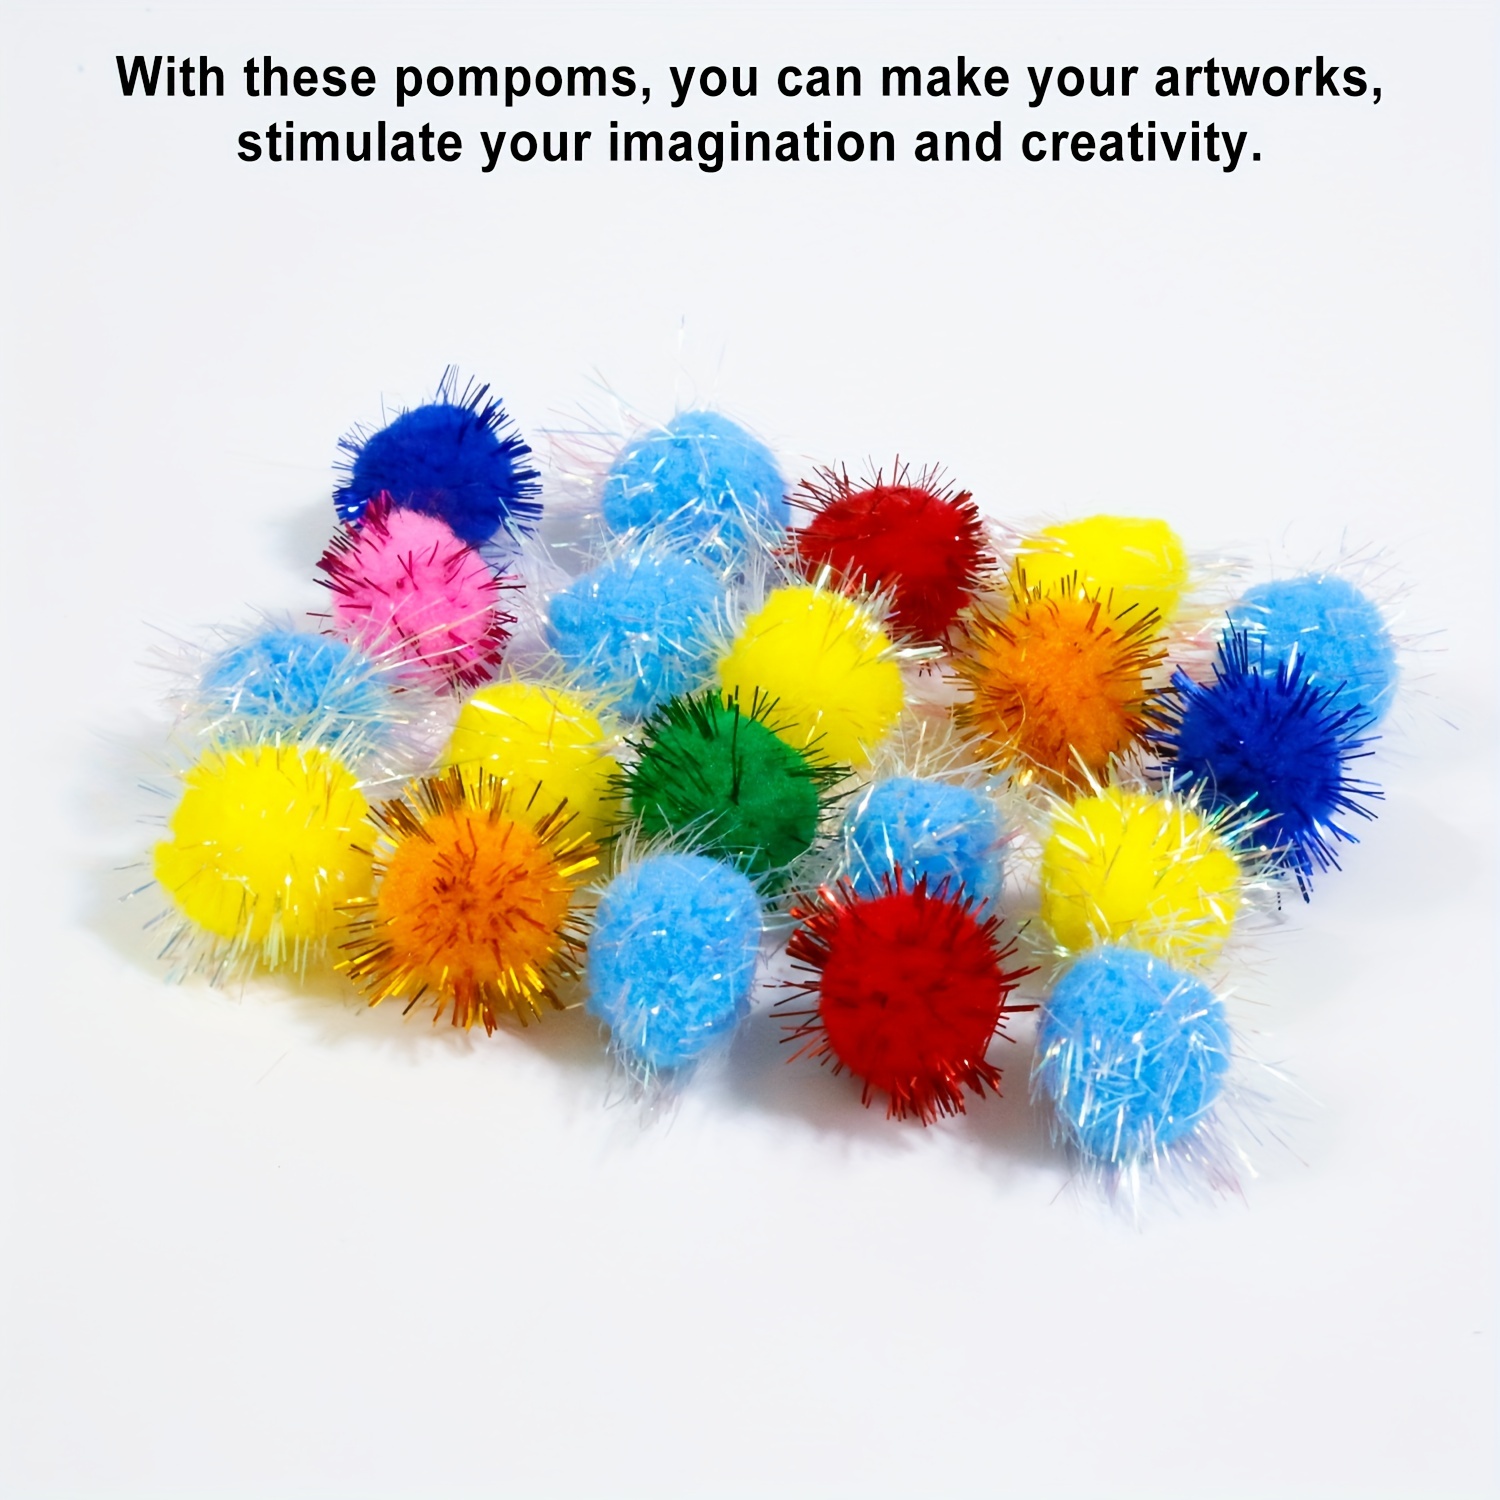 CHENSHUO Large Mixed Color Poms Costume Accessory,Craft Pom Pom Balls, Pom Pom Balls for Arts and DIY Creative Crafts Decorations,2 Colors, Black